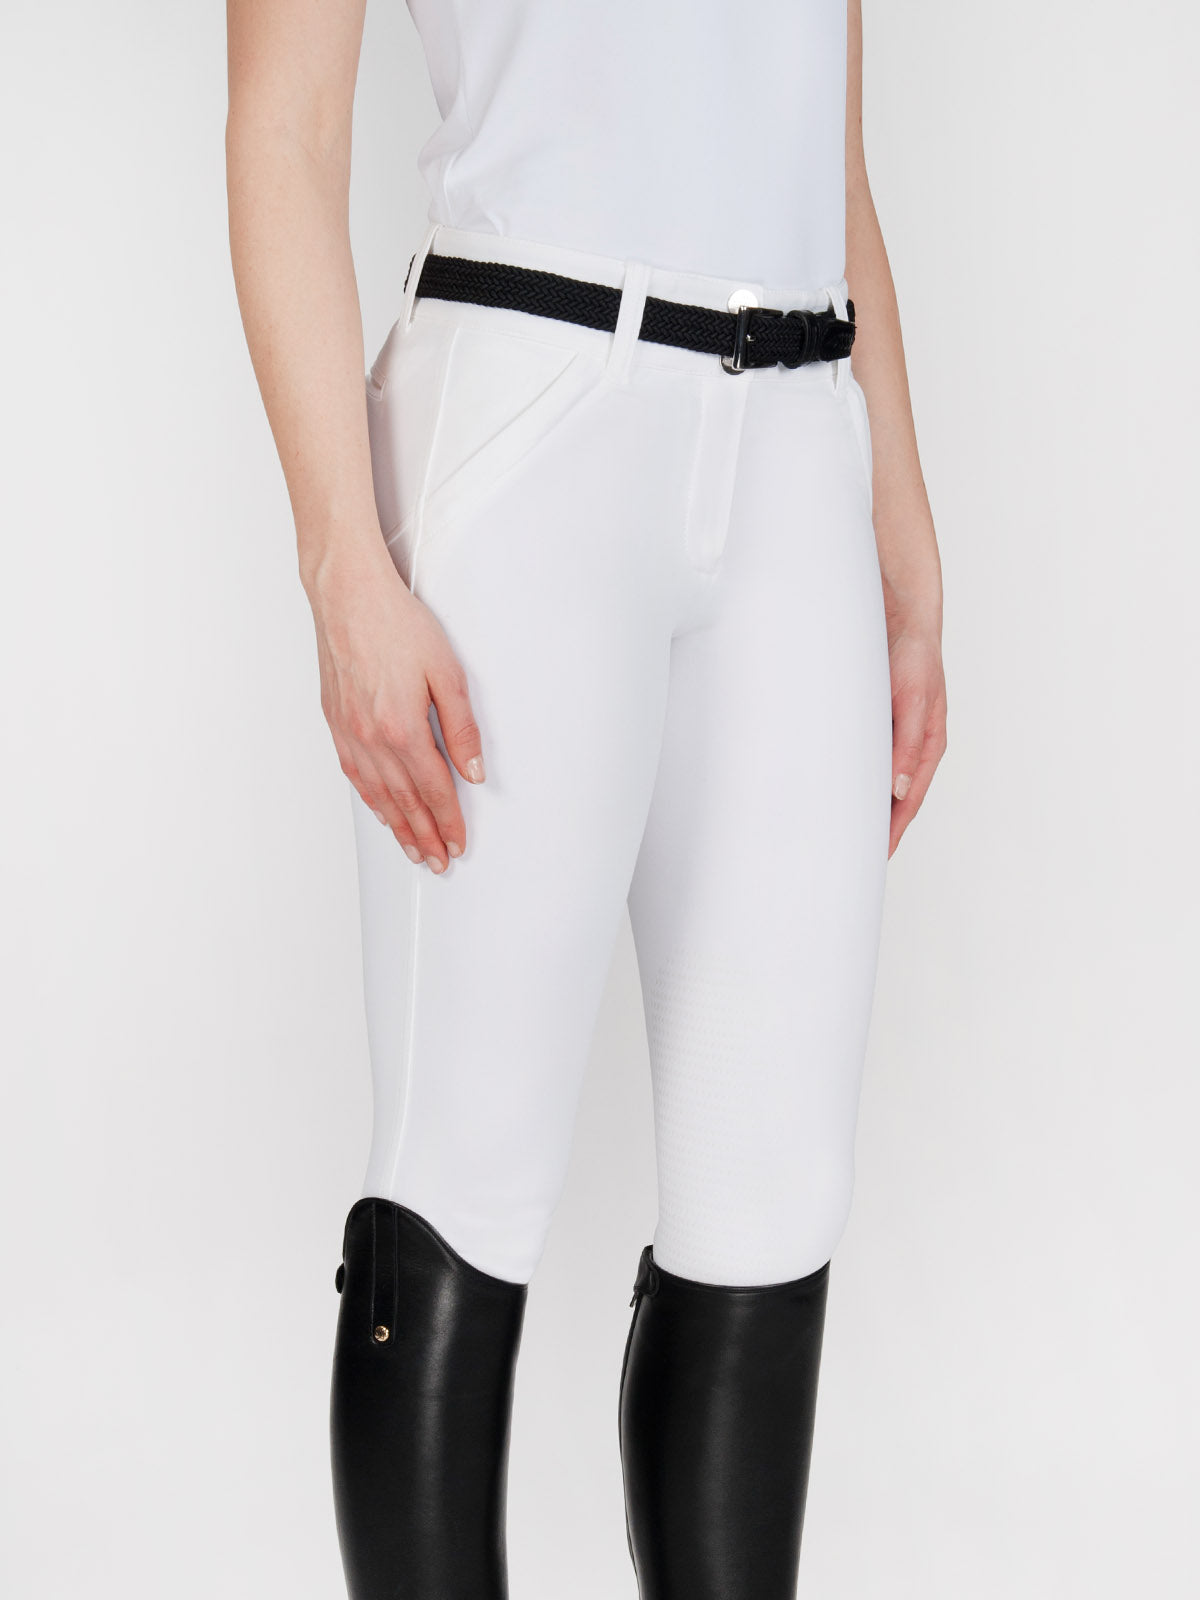 The innovative Equiline X Shape breech has inner and outer special inserts created to support the body and the balance while riding. They have a comfort waist with push up Equiline patented fabric made from microfibre combined with an ultra ergonomic tailoring and knee grip system these will be those breeches you can’t live without!  